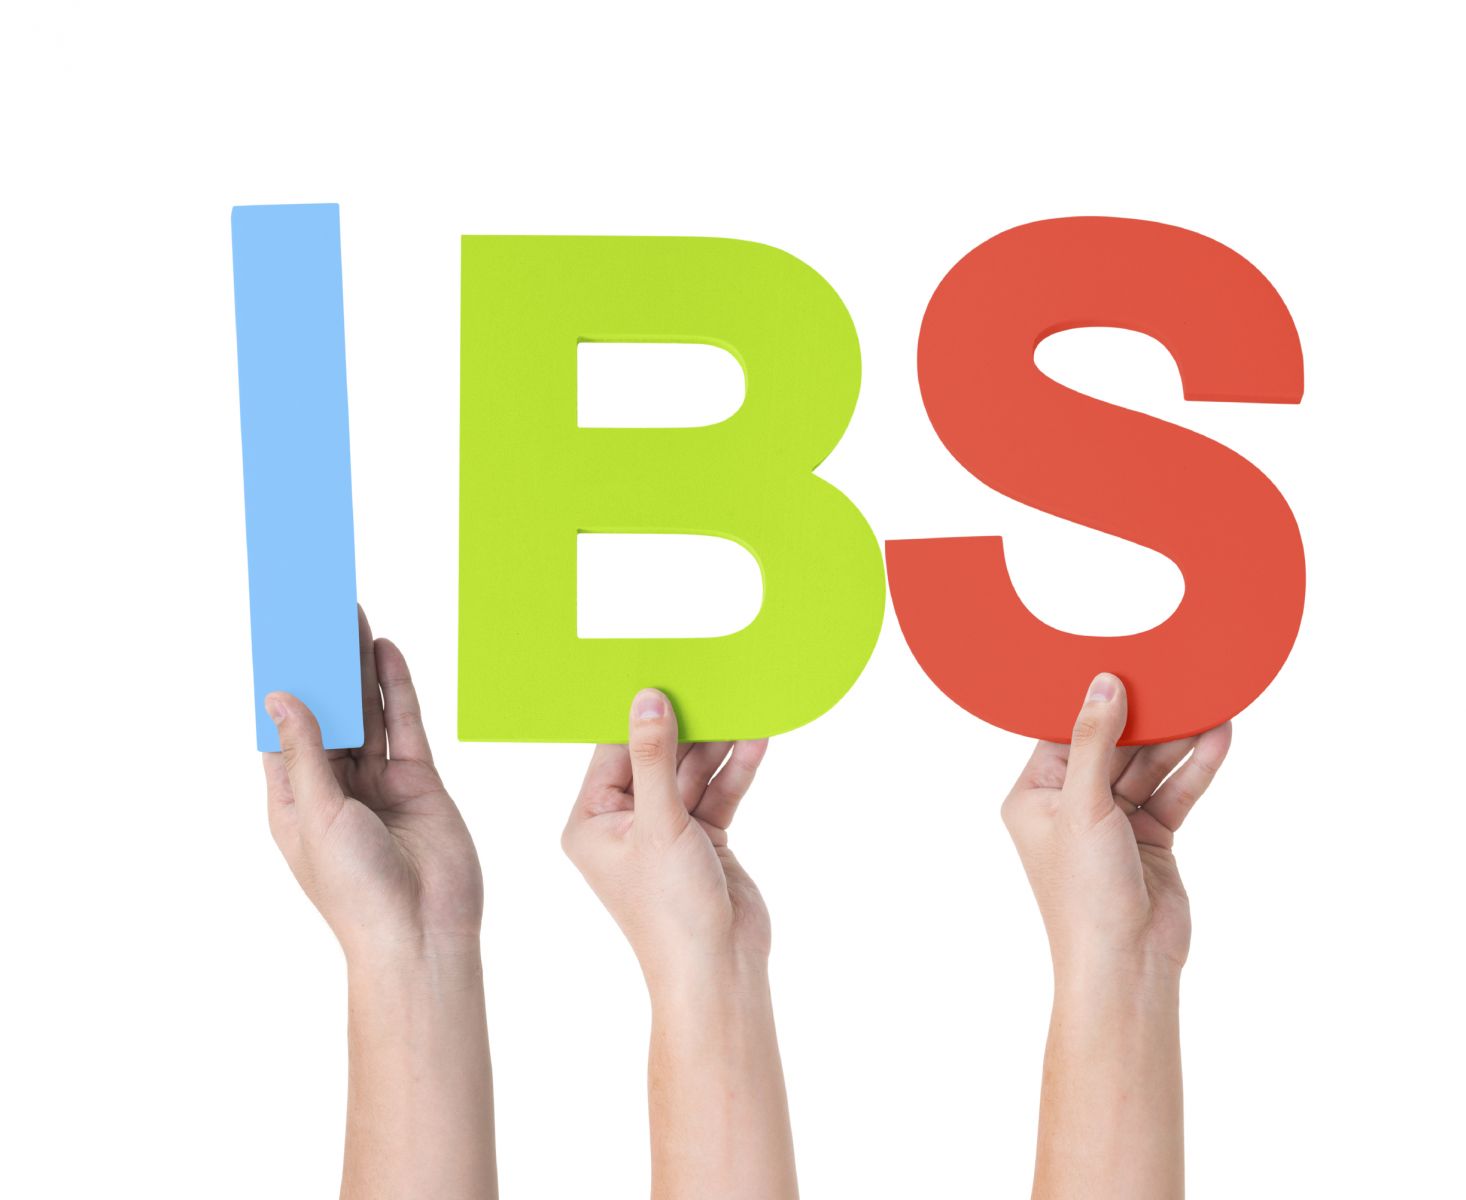 Enhance Your Living With Irritable Bowel Syndrome Through Effective Symptom Management